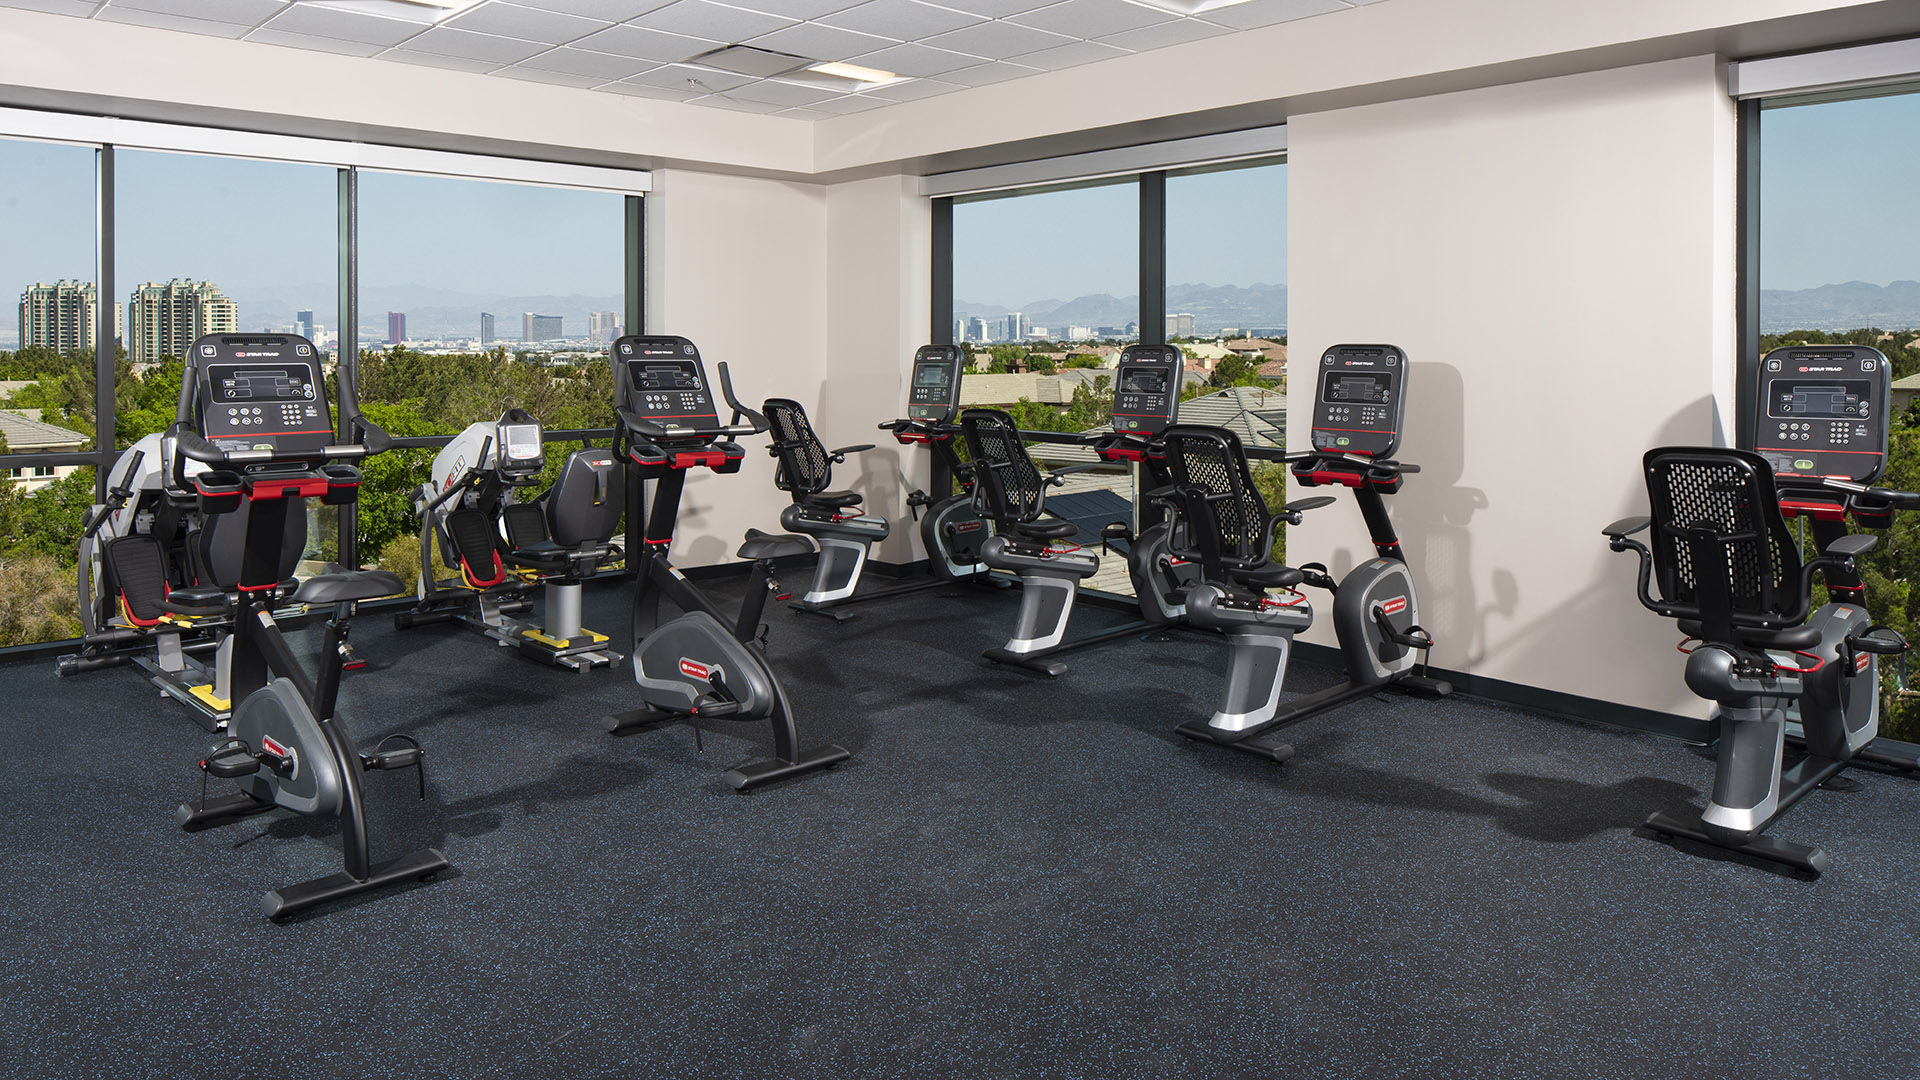 Exercise/therapy room with stationary bikes at Crovetti Orthopaedics